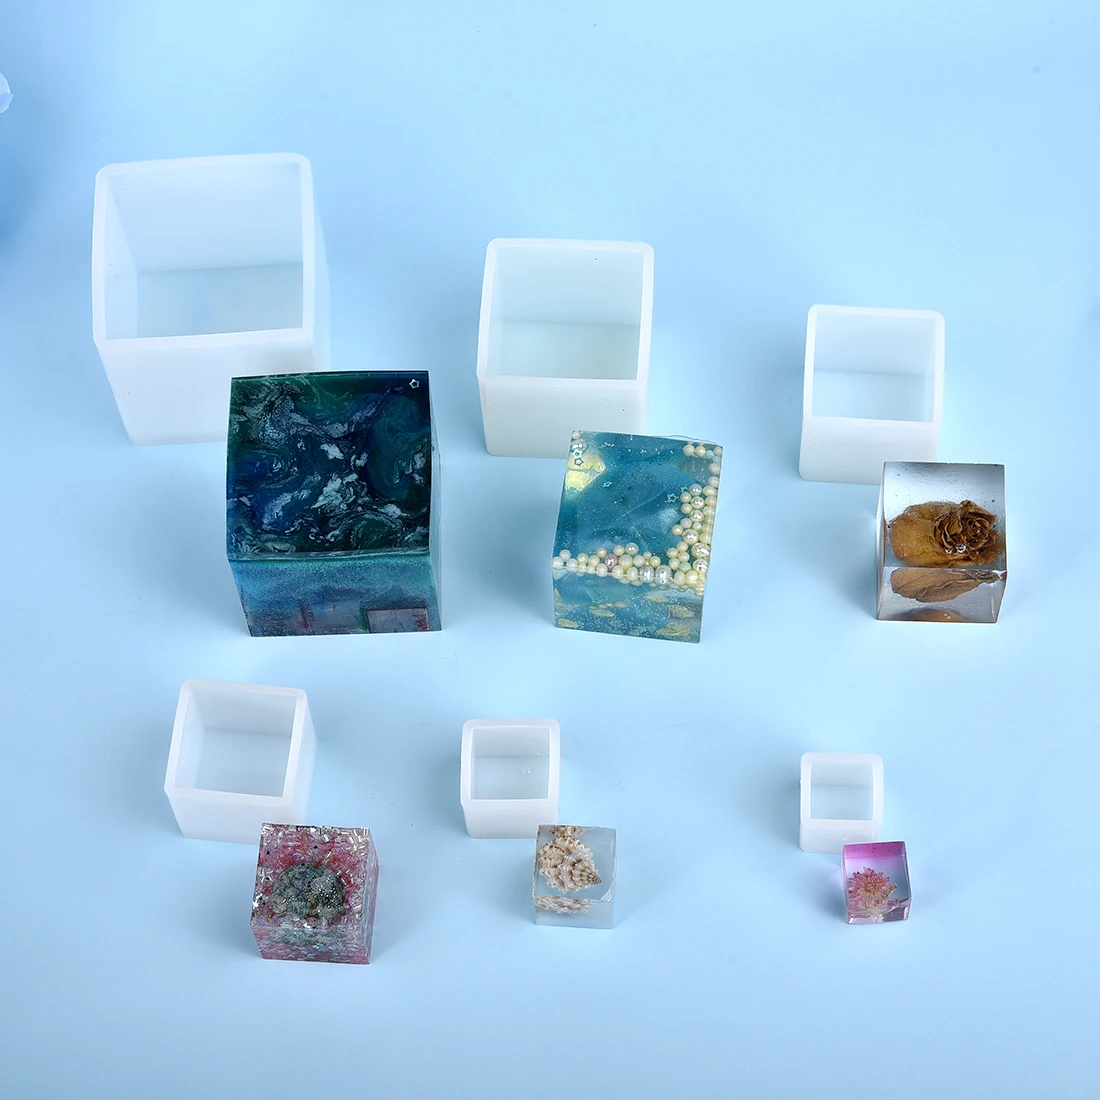 https://ae01.alicdn.com/kf/Sabf04b99d9694ea2a412844e3b8f42f1v/Silicone-Mold-DIY-Crystal-Cuboid-Cube-Epoxy-Resin-Mould-Casting-Mold-Jewelry-Making-Tools-Flower-Decor.jpg